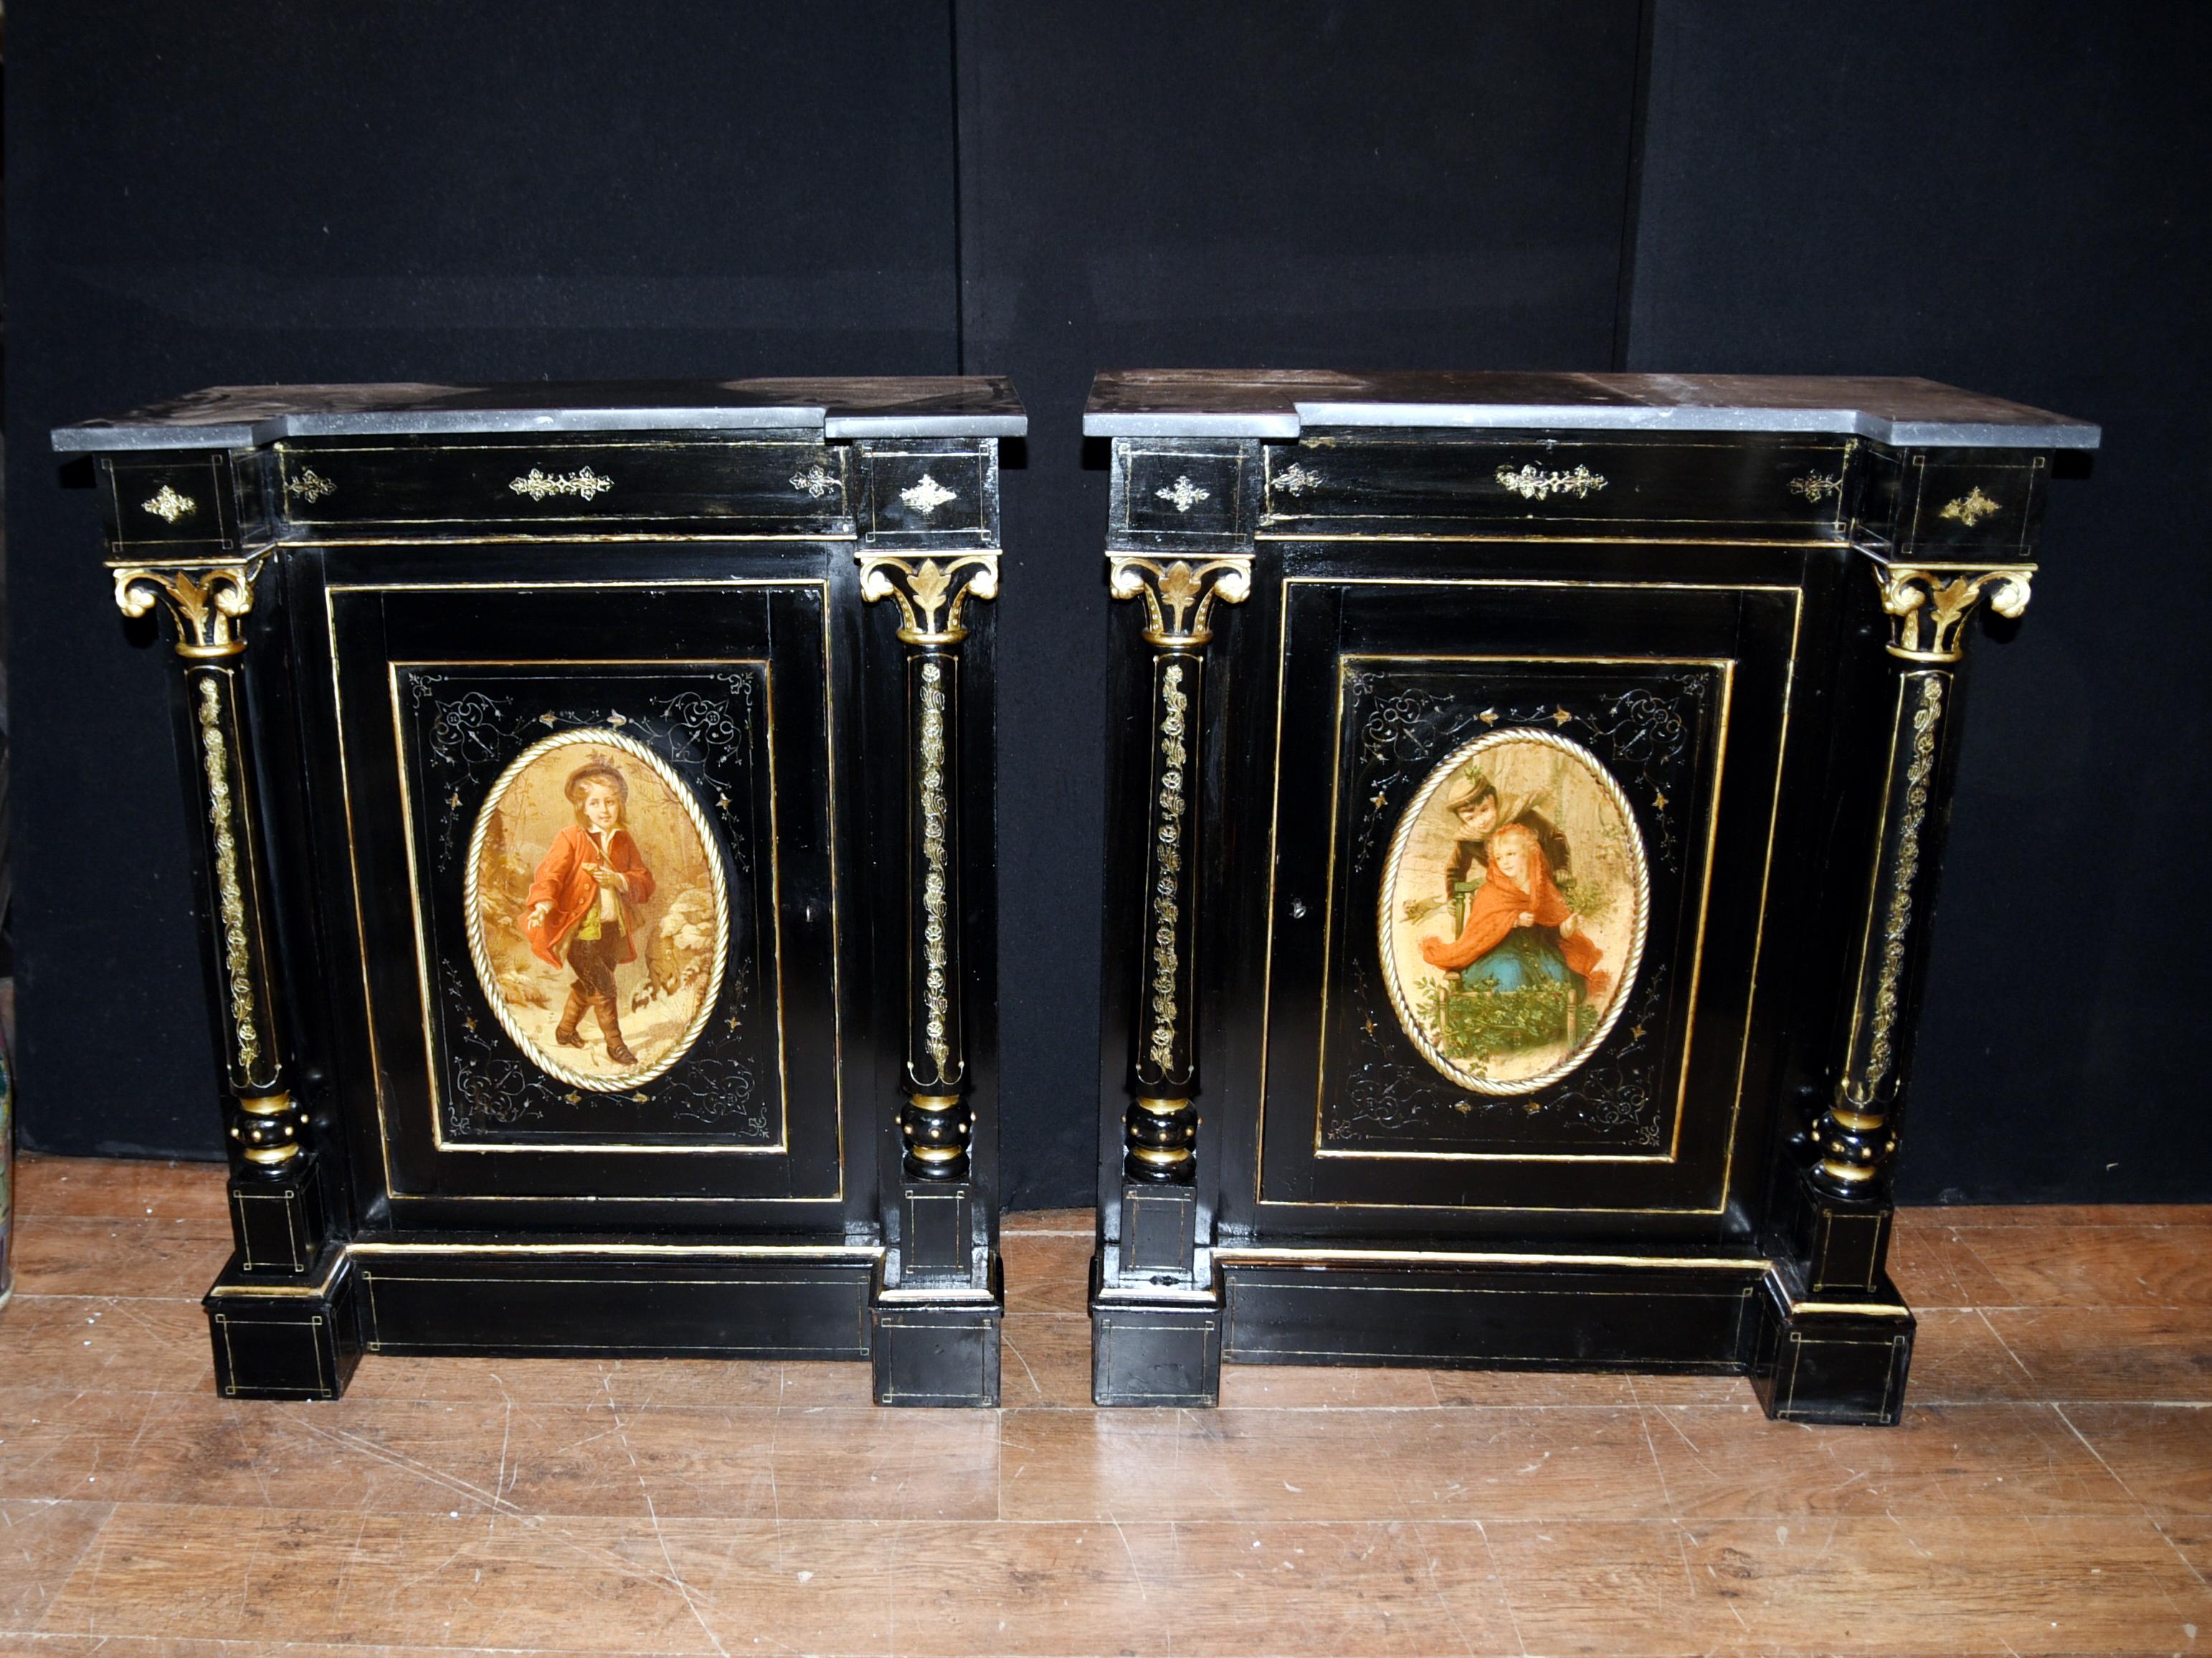 - Wonderful pair of antique French Empire cabinets with ebonized finish
- Great interiors look to this pair
- Look at the wonderful hand painted oval plaques with children, very detailed
- We date this pair to circa 1880
- Purchased from a